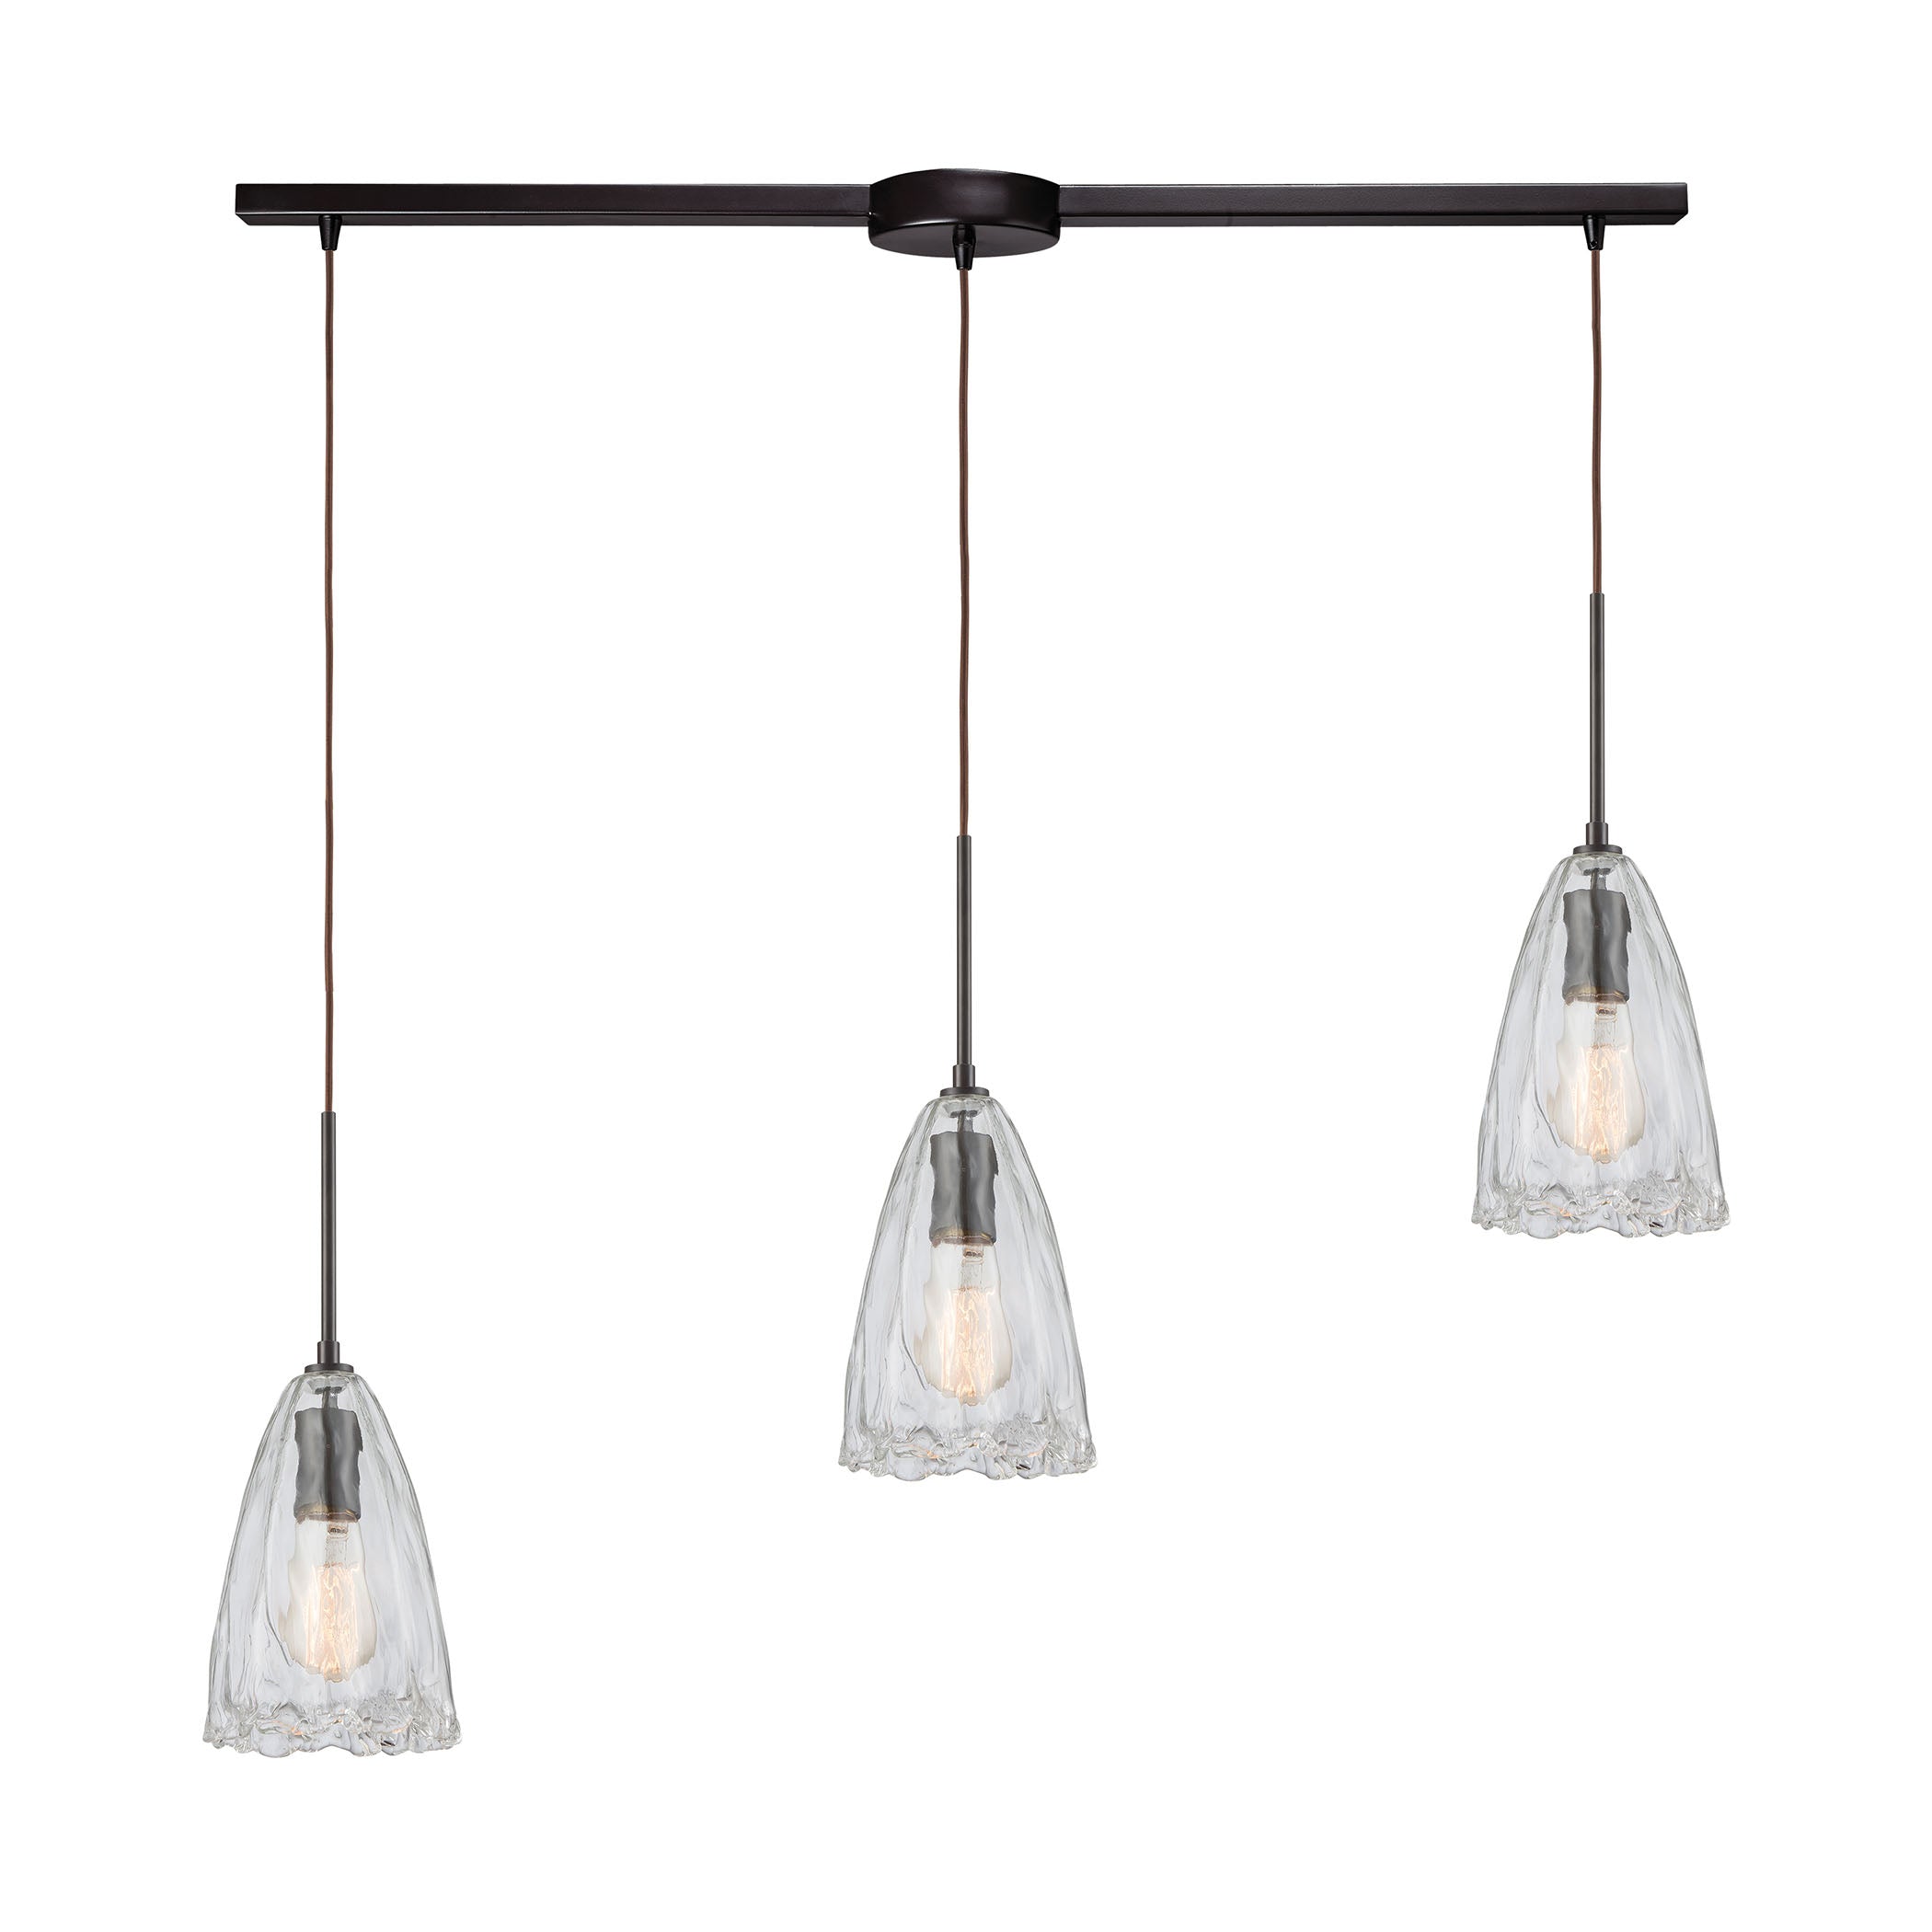 ELK Lighting 10459/3L Hand Formed Glass 3-Light Linear Mini Pendant Fixture in Oiled Bronze with Clear Hand-formed Glass